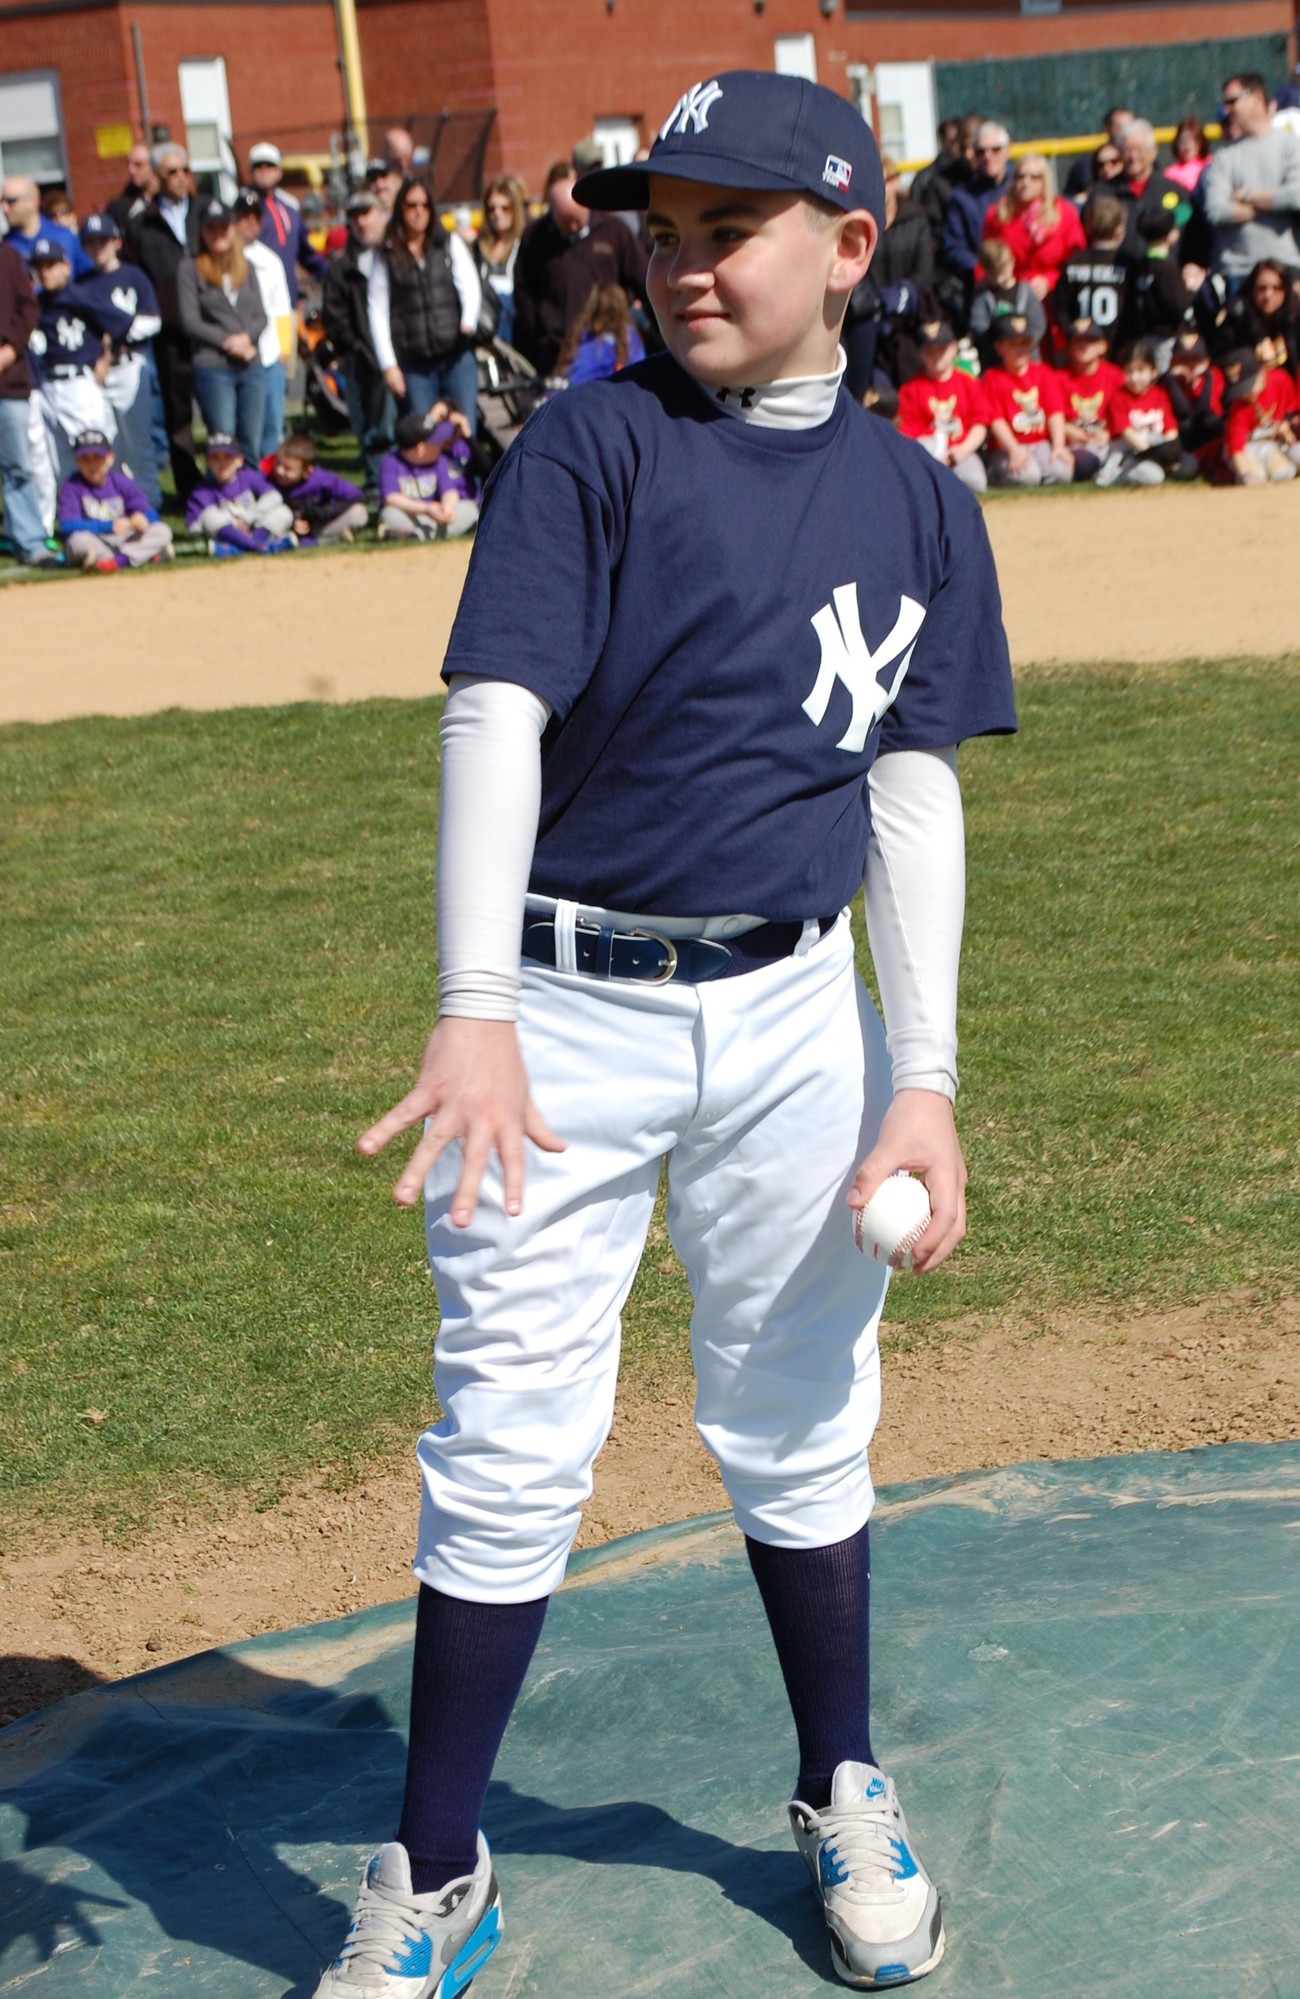 Yankee Liam Casey who threw out the ceremonial first pitch in honor of his late grandfather.